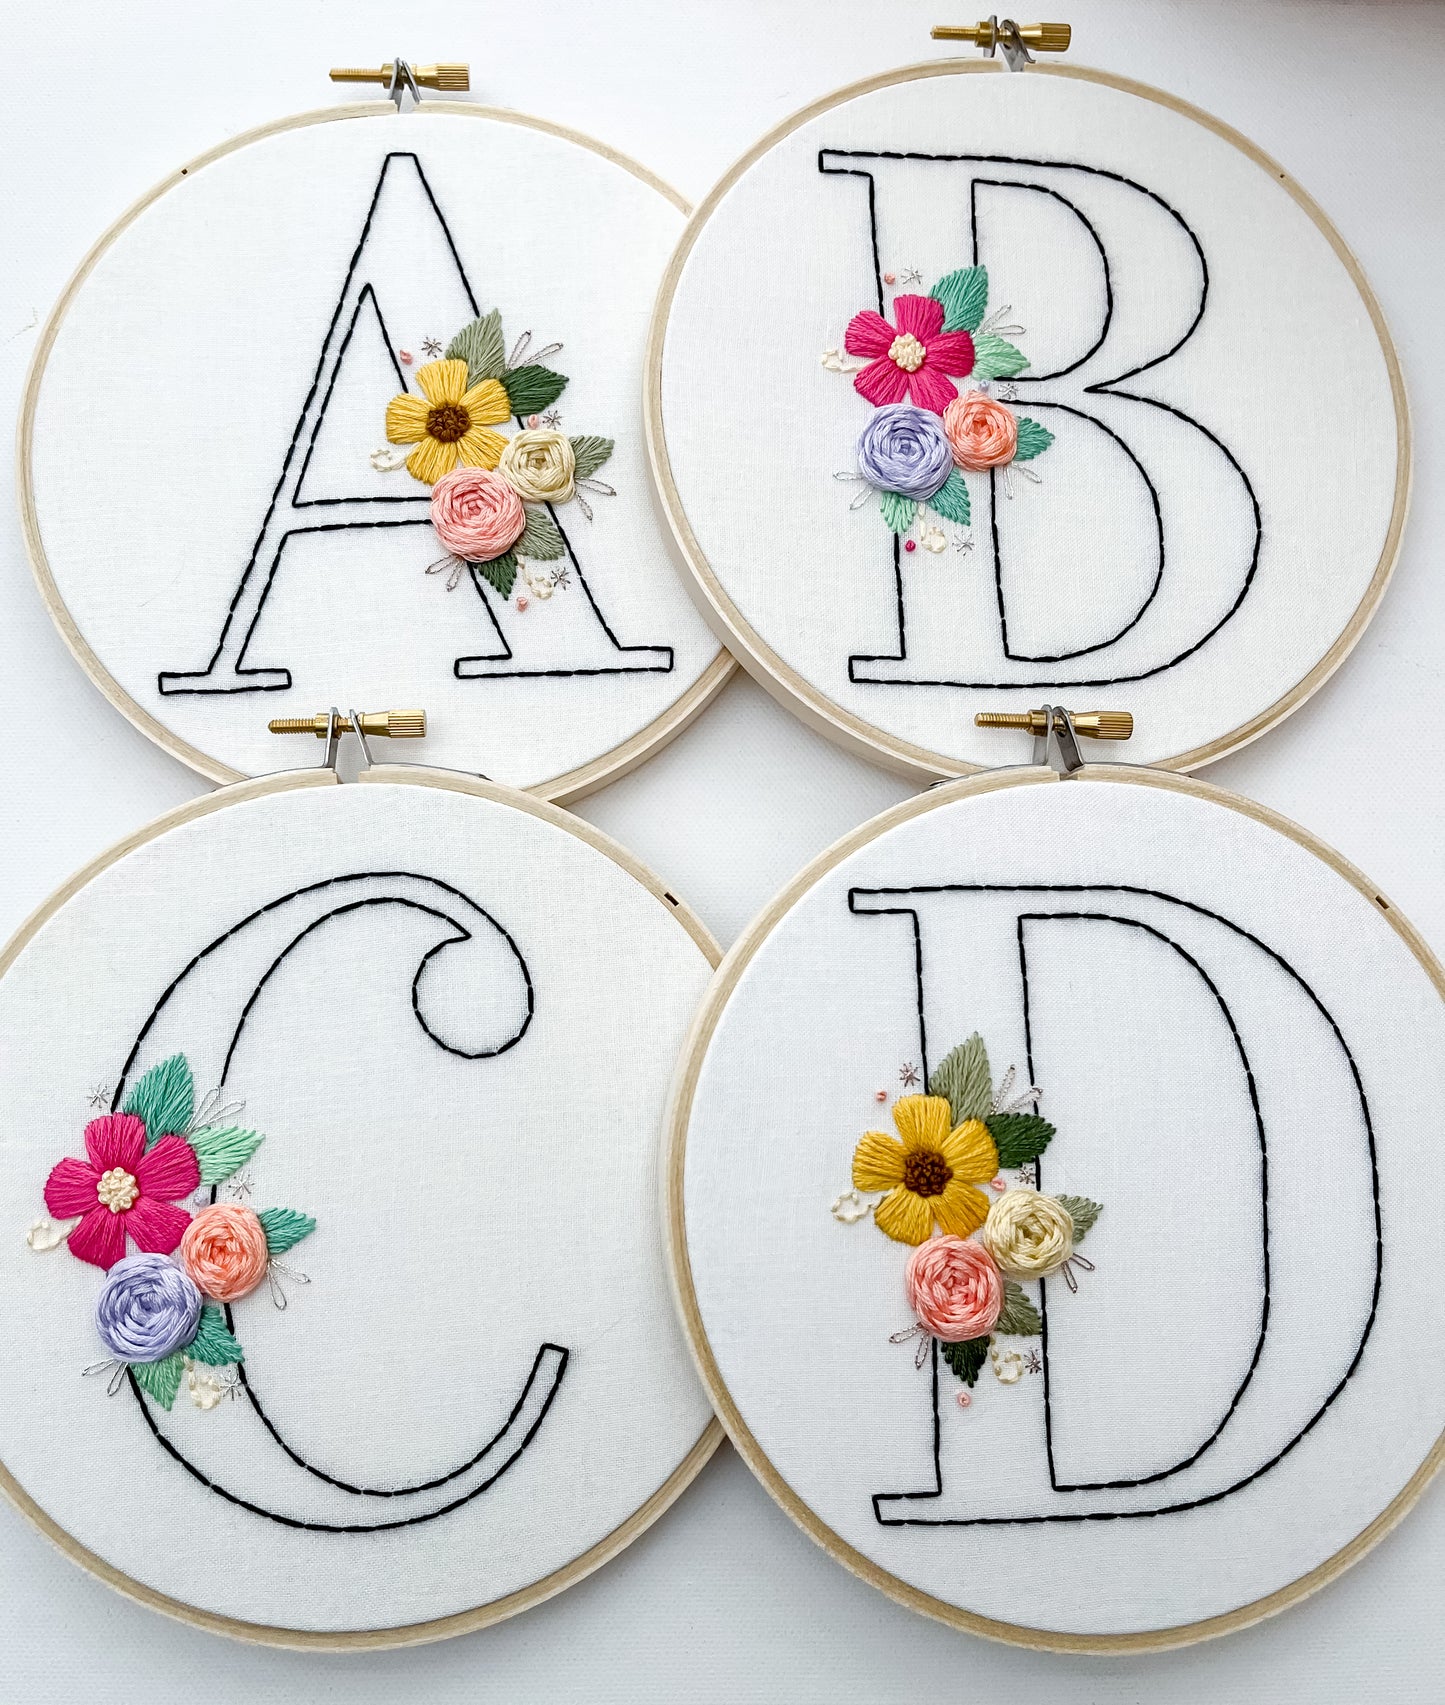 PDF Pattern - Simple Floral Monograms, Floral Monogram Patterns, ABC Letters Initials and Numbers Patterns